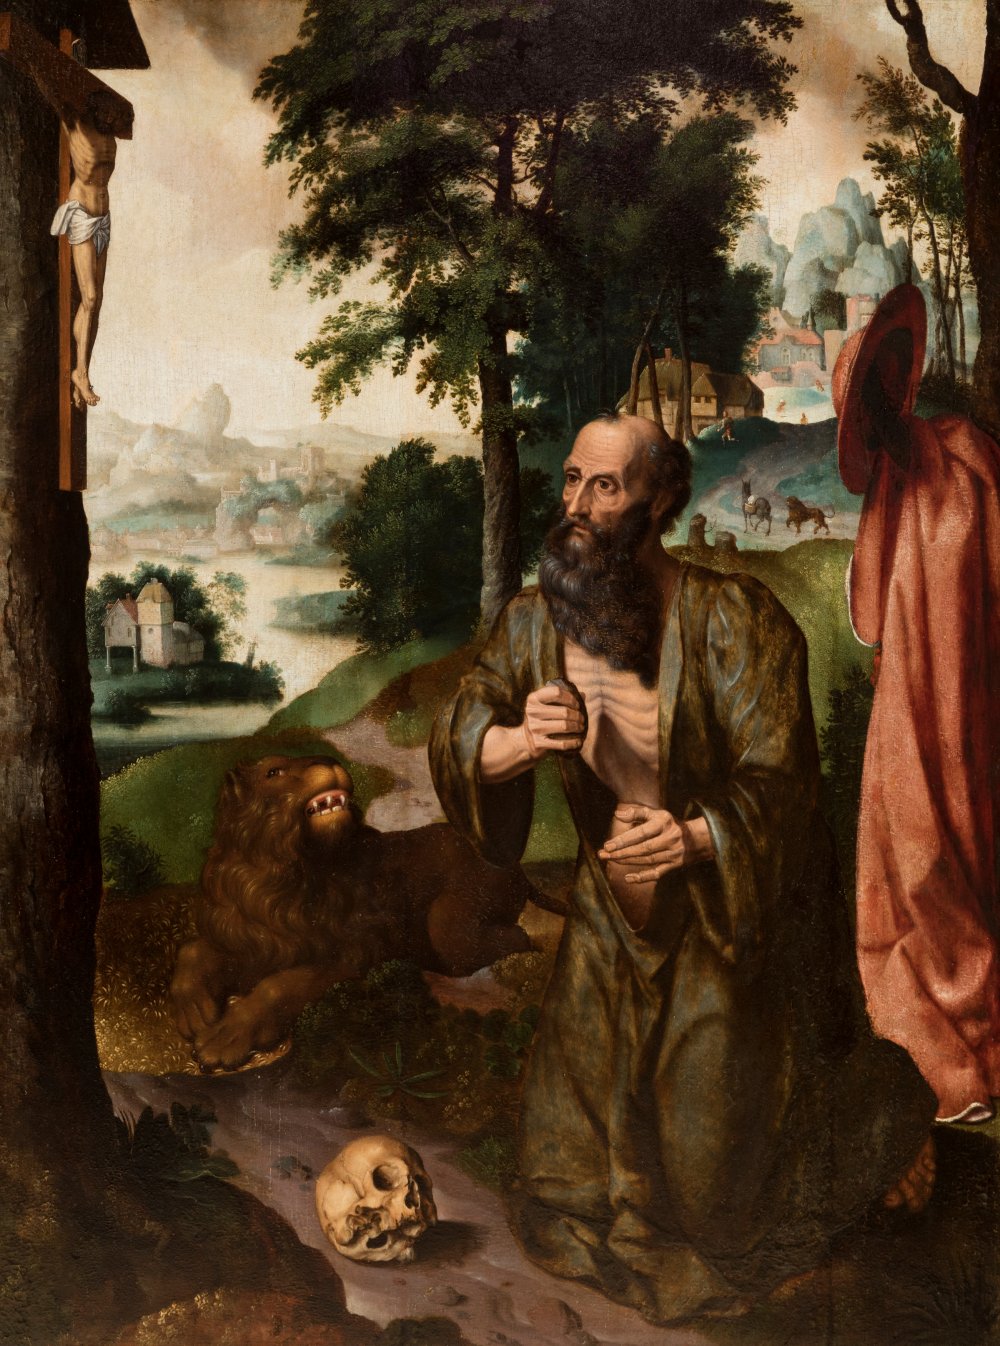 Attributed to DIRK BOUTS (Haarlem, c. 1410/1420 - Leuven, 1475)."Saint Hieronymus Perpetent.Oil on